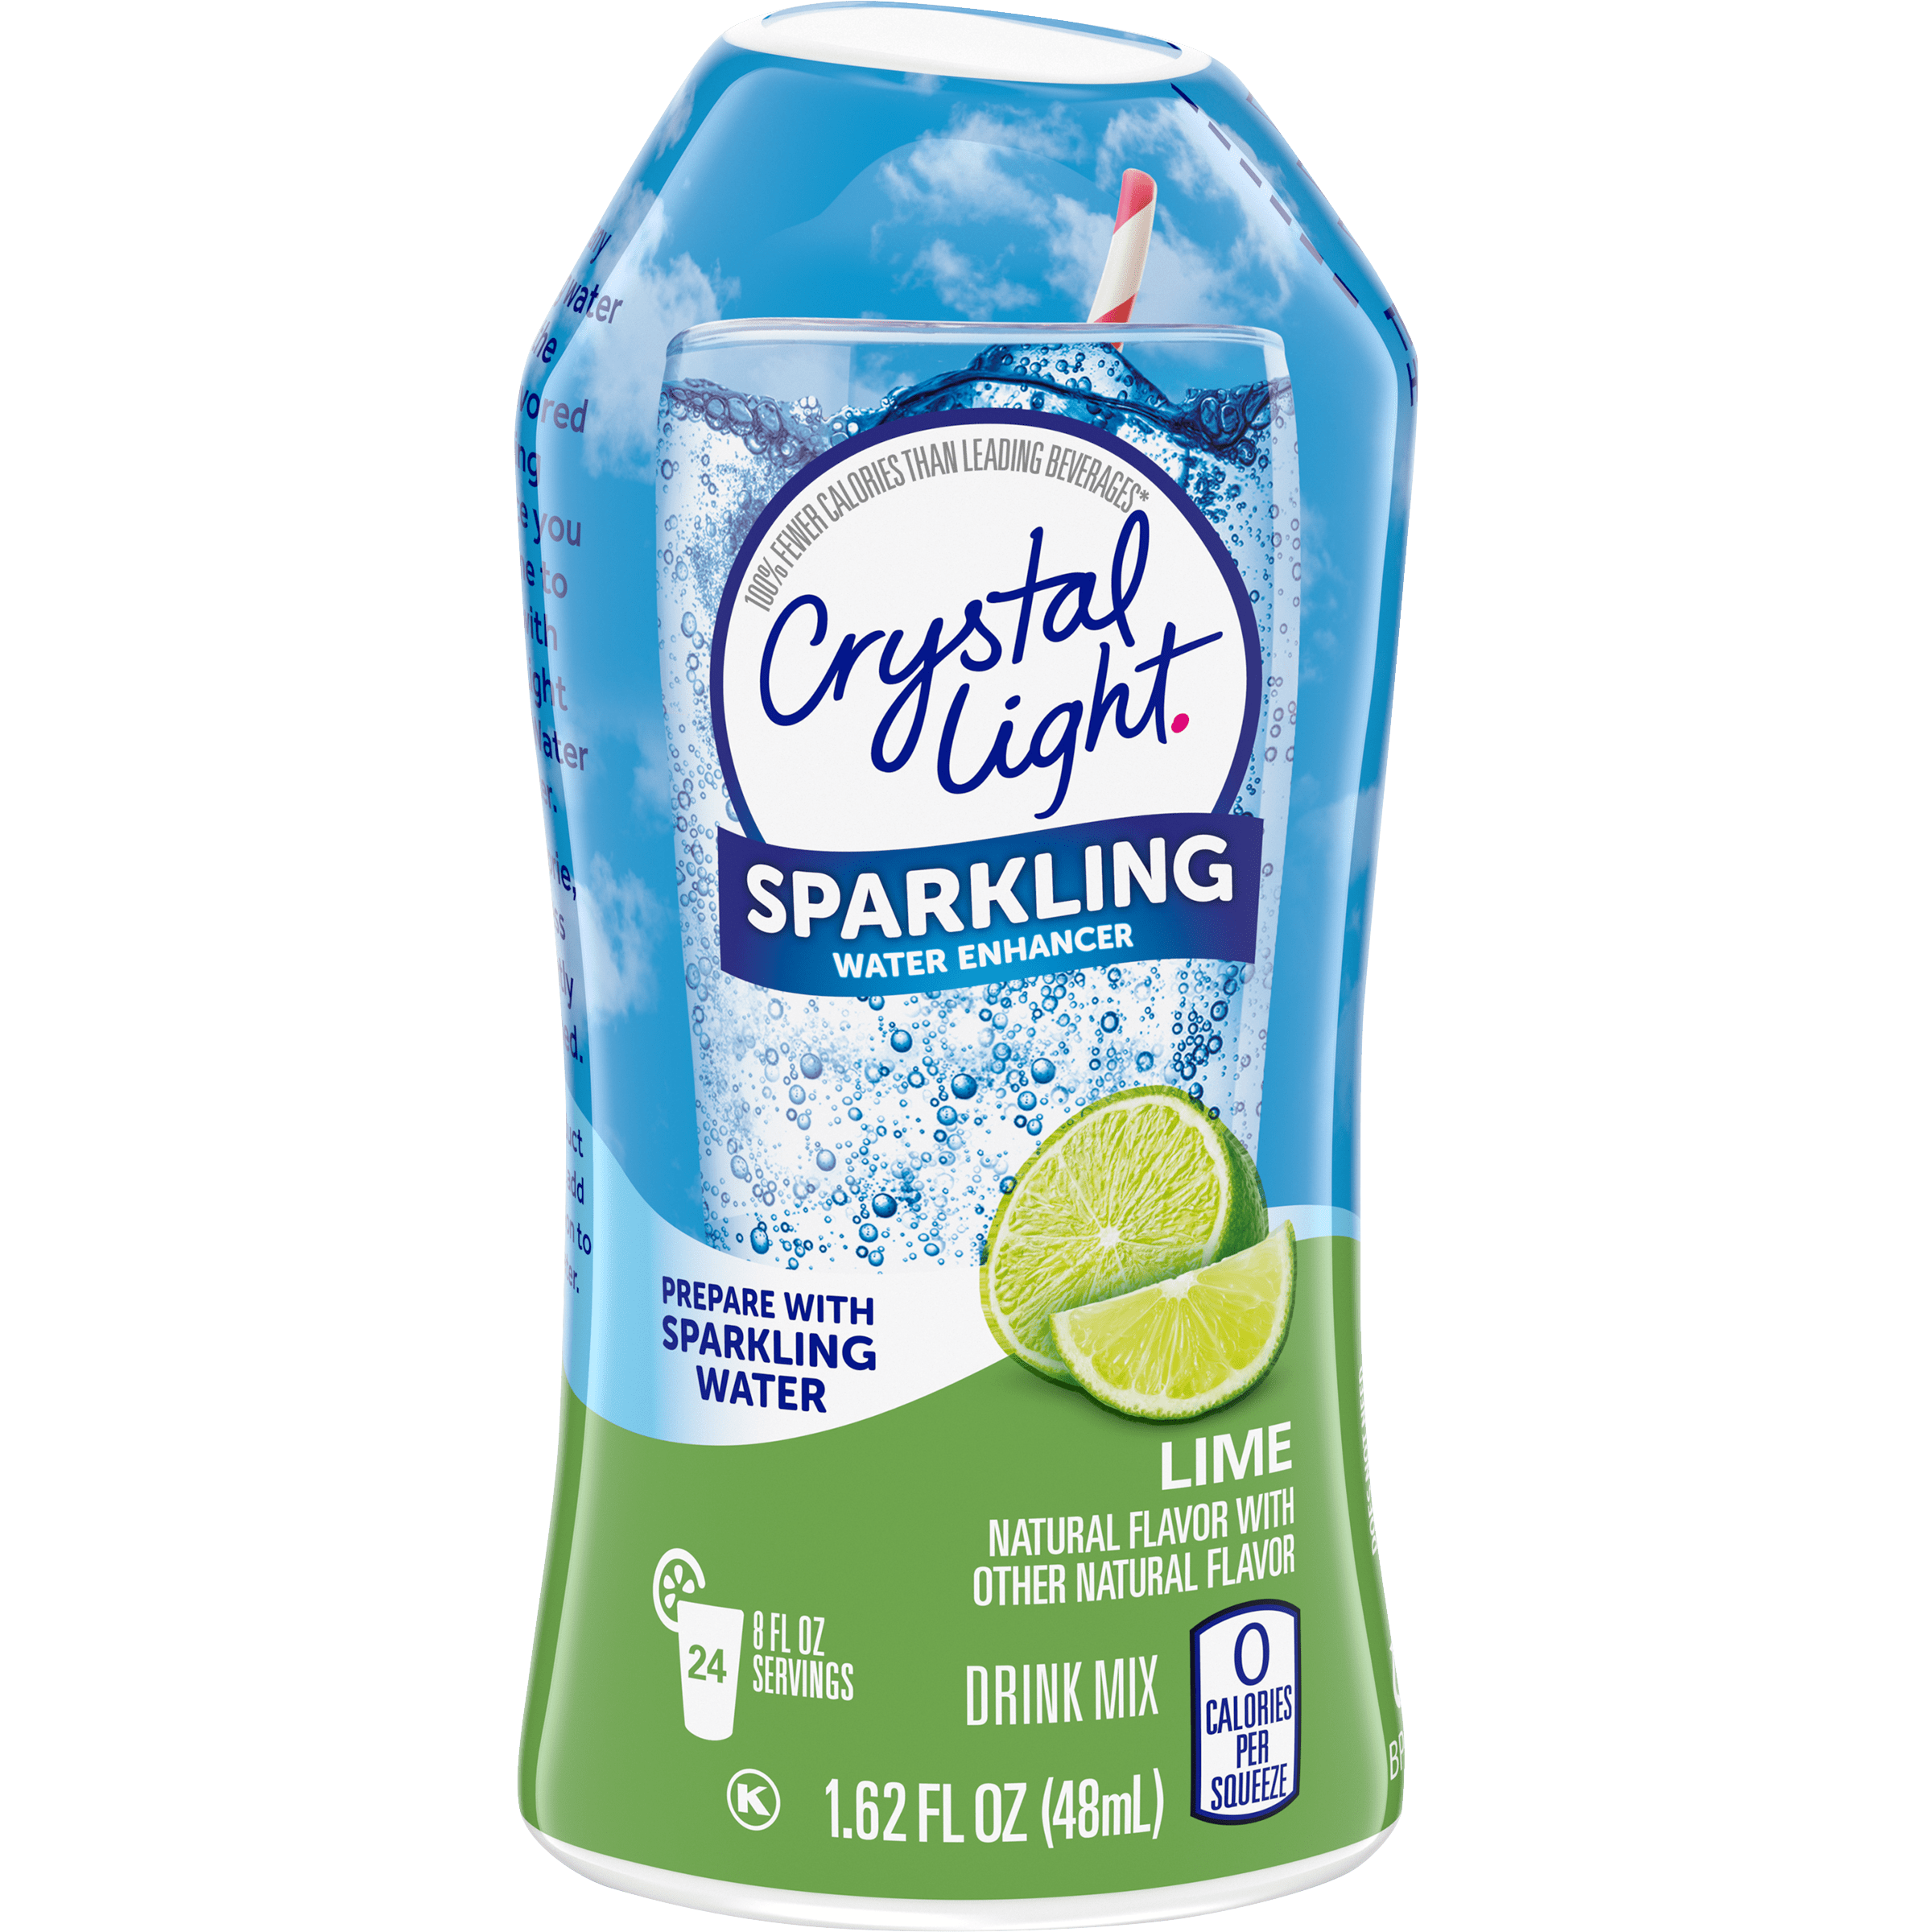 Lime Naturally Flavored Sparkling Water Enhancer Drink Mix